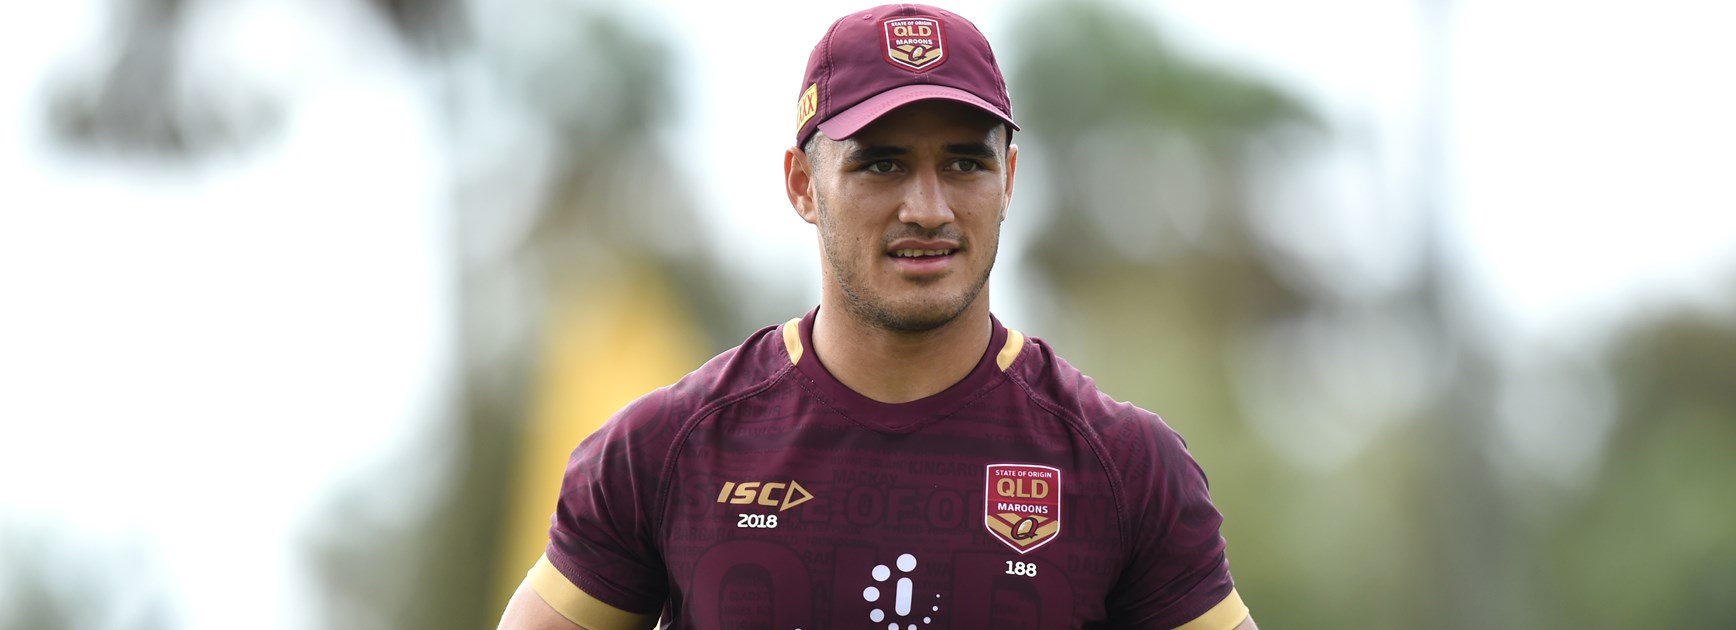 Maroons have the keys to unlock Holmes puzzle